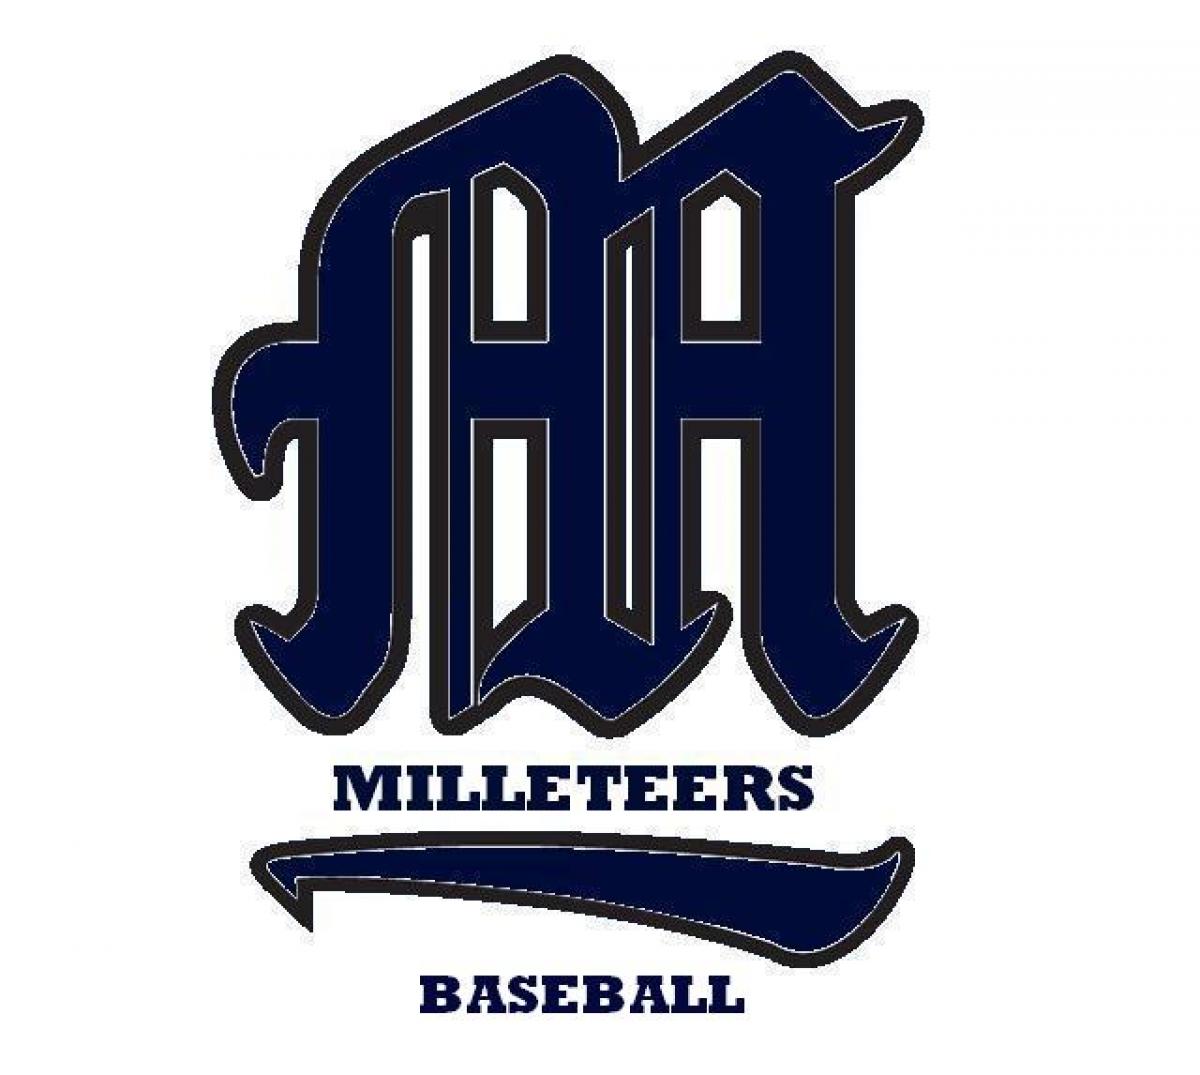 Milleteers Hold On To Take Out Royals